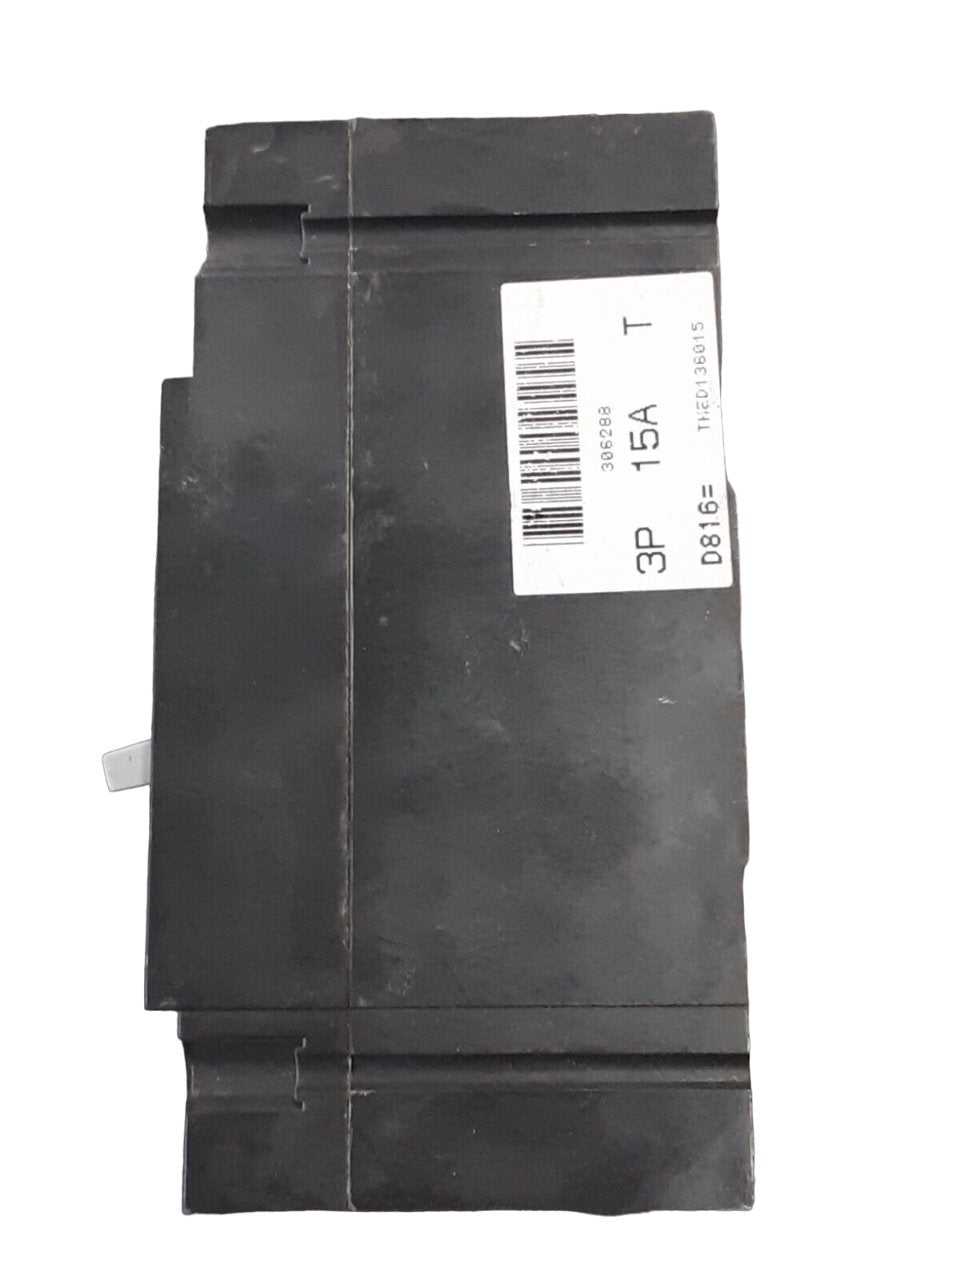 THED136015WL - General Electrics - Molded Case Circuit Breakers